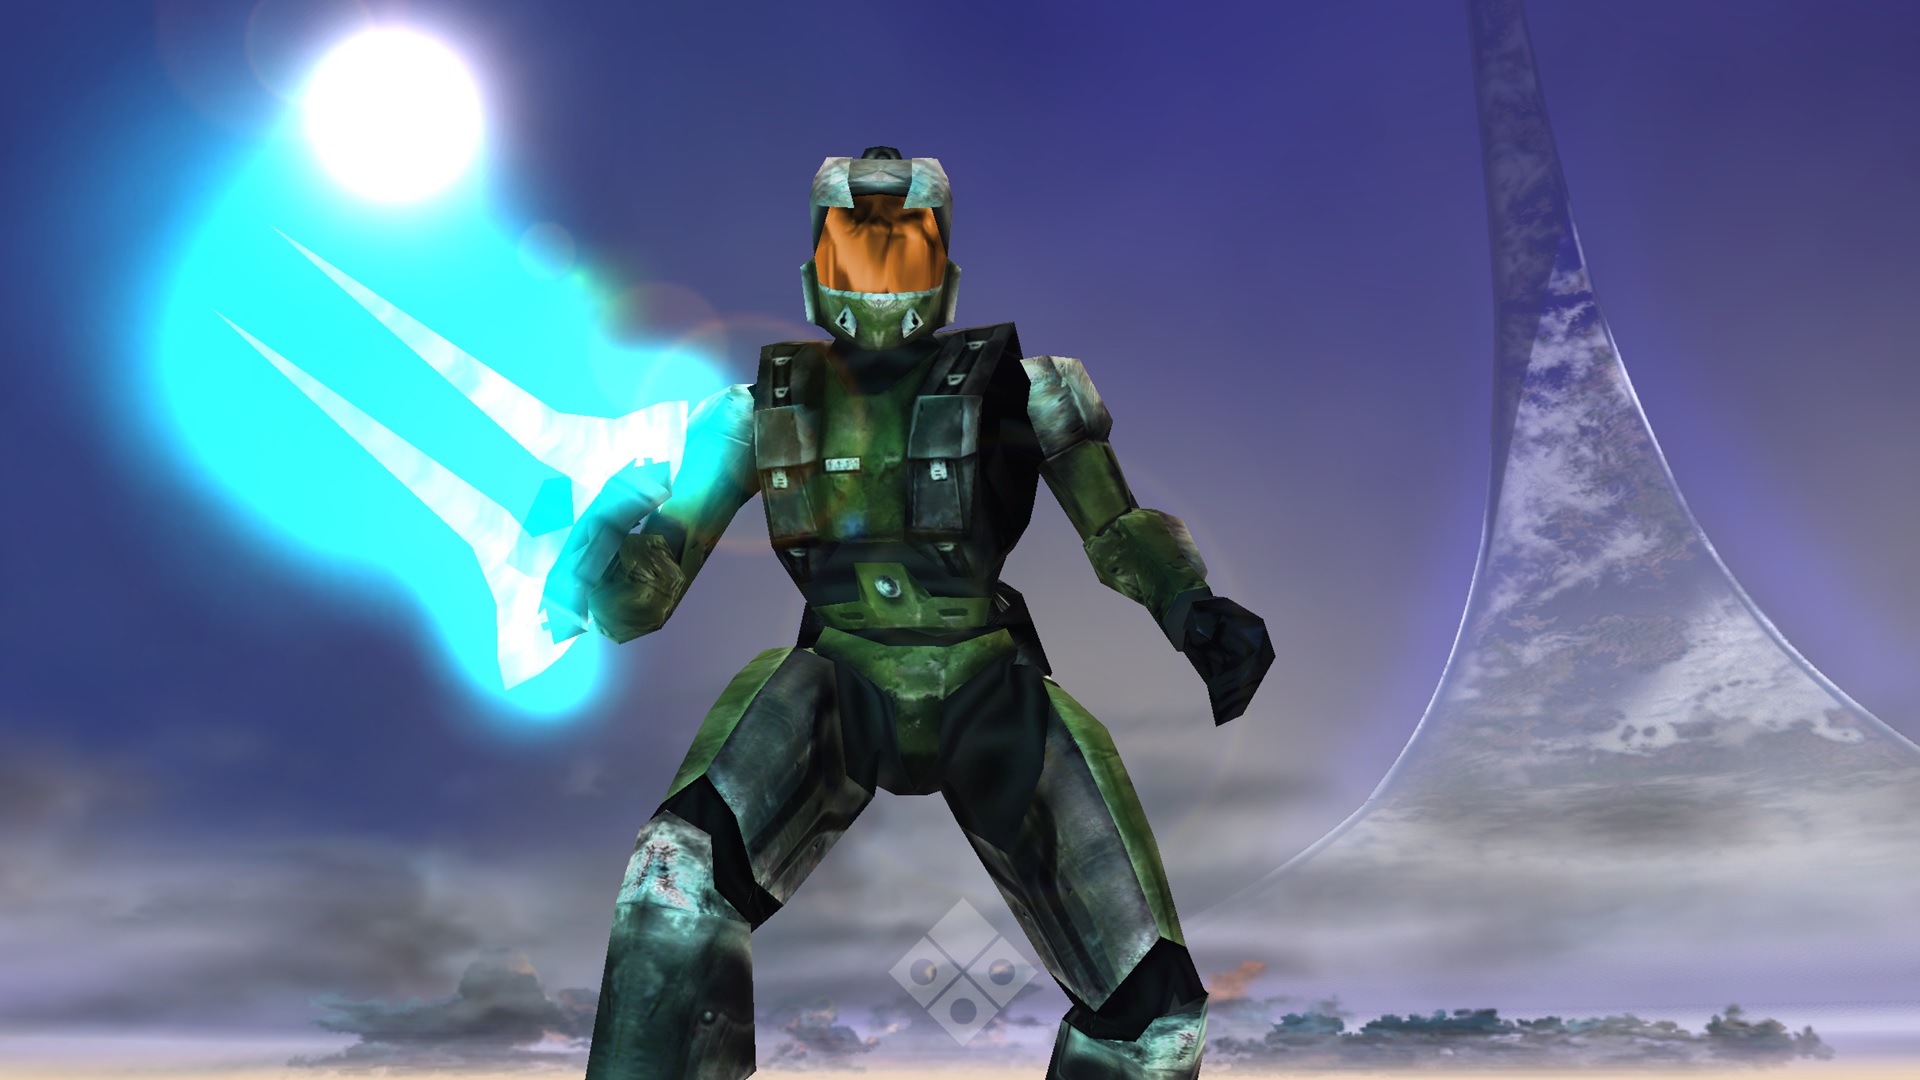 1999 cyborg with an energy sword on a Halo ring